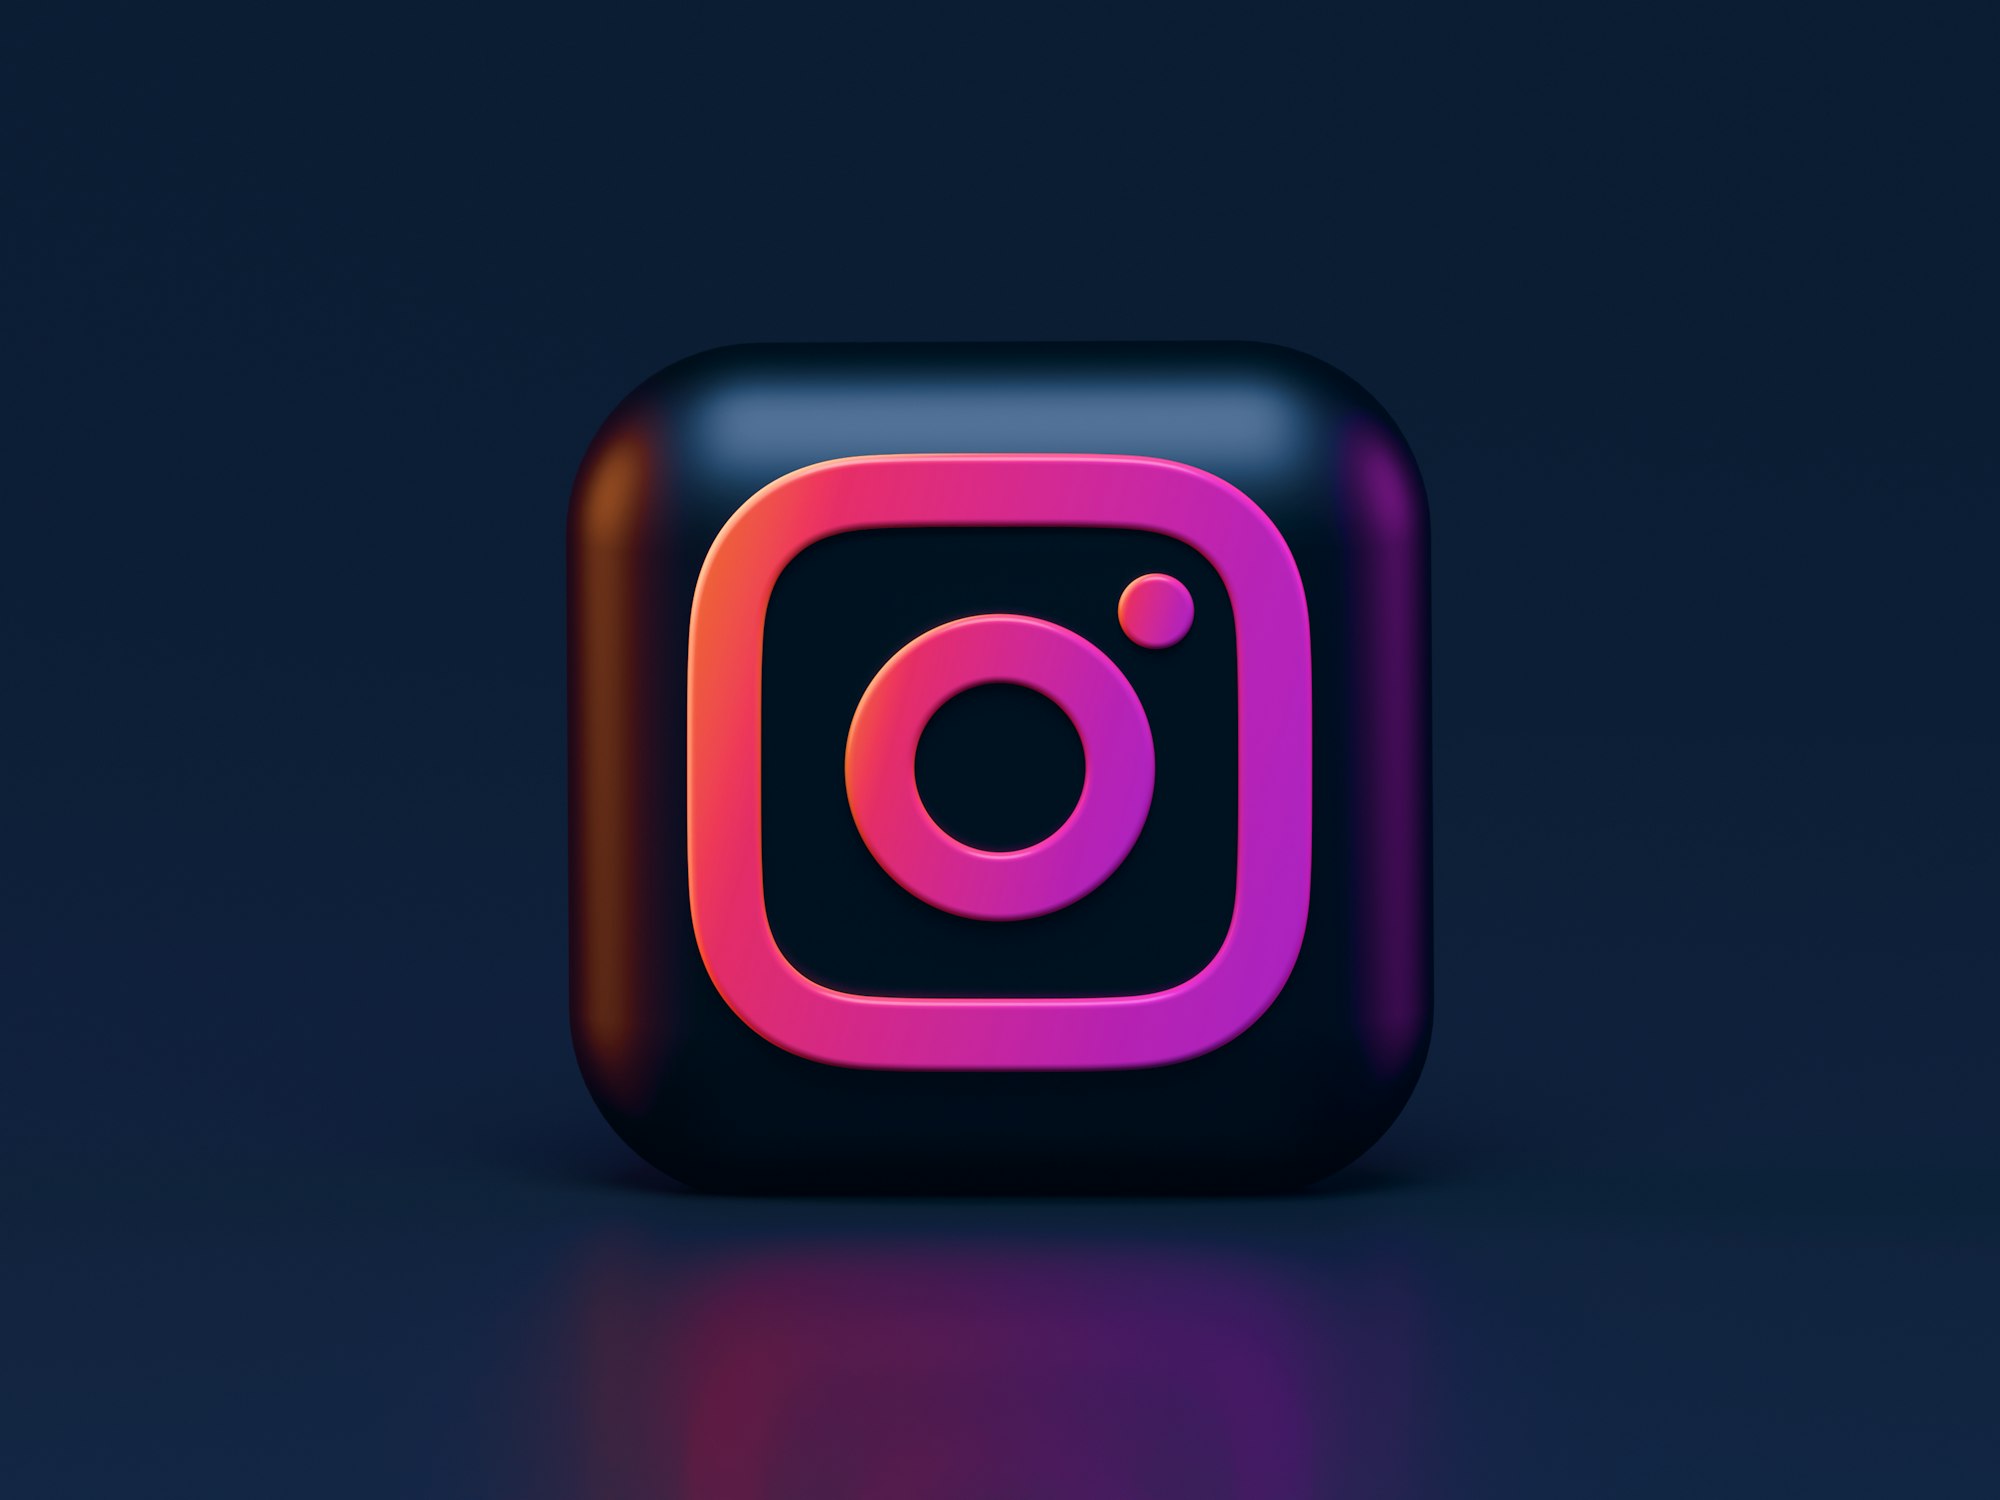 How To Get More Followers On Instagram?